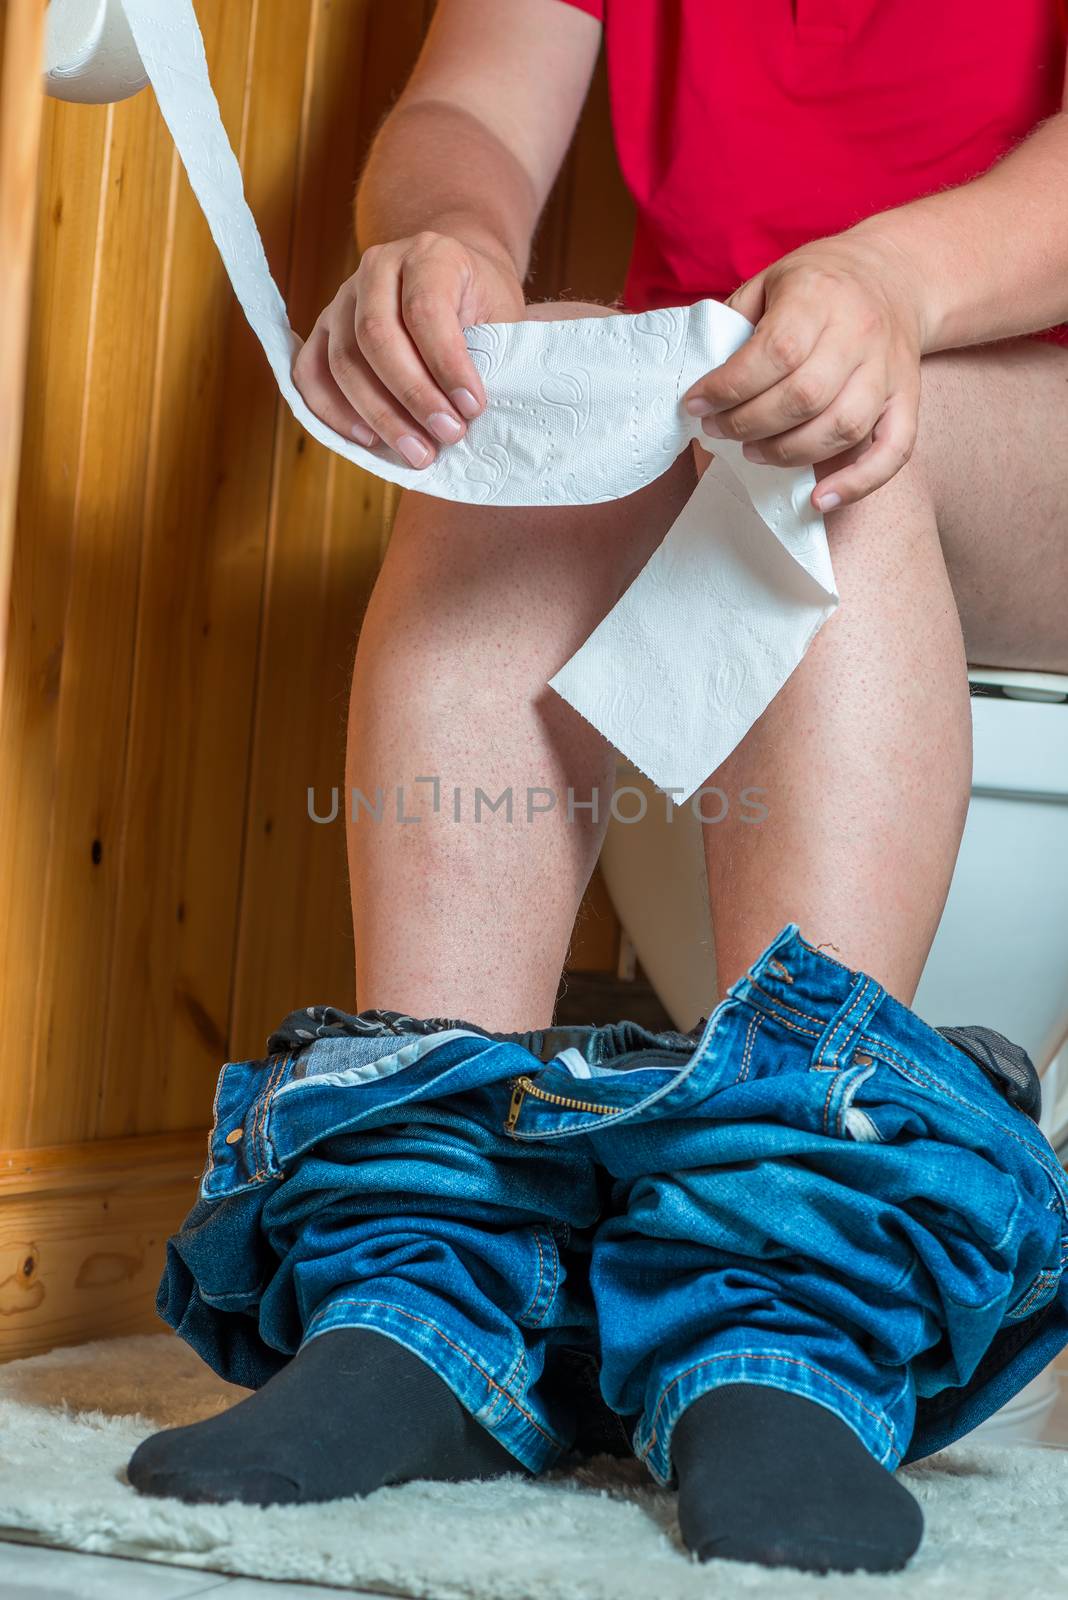 concept photo - a man in a toilet tears off toilet paper by kosmsos111